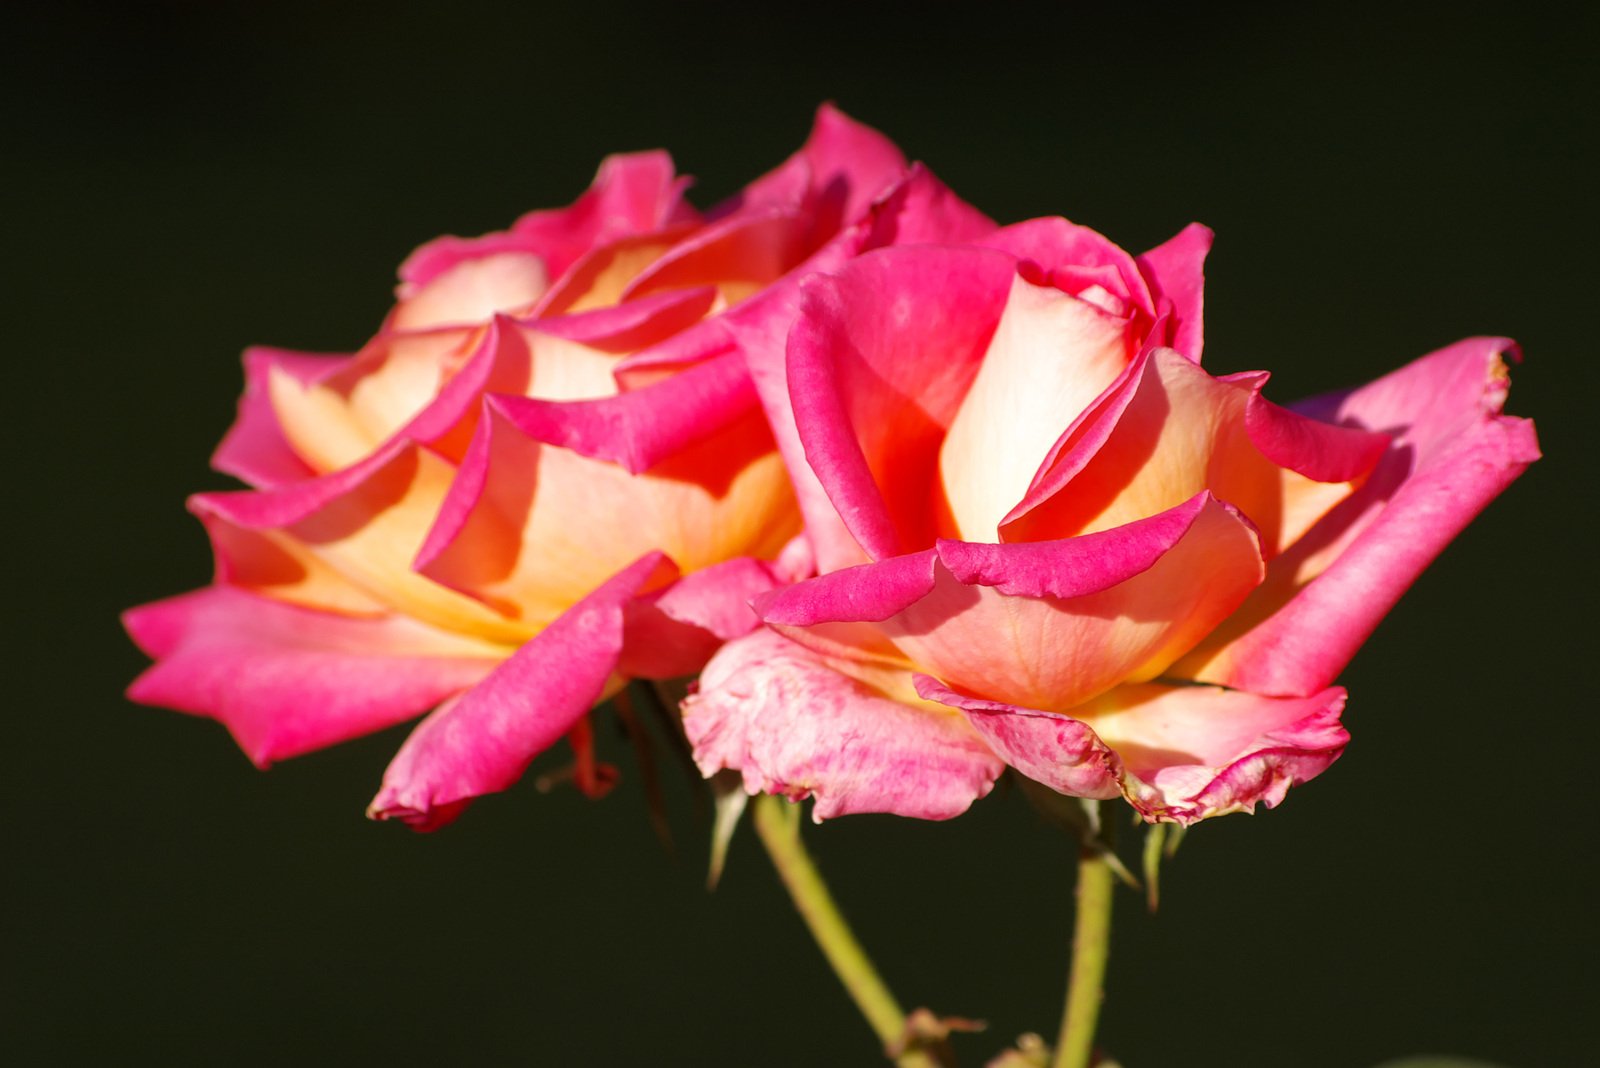 two pink roses with yellow tips and petals